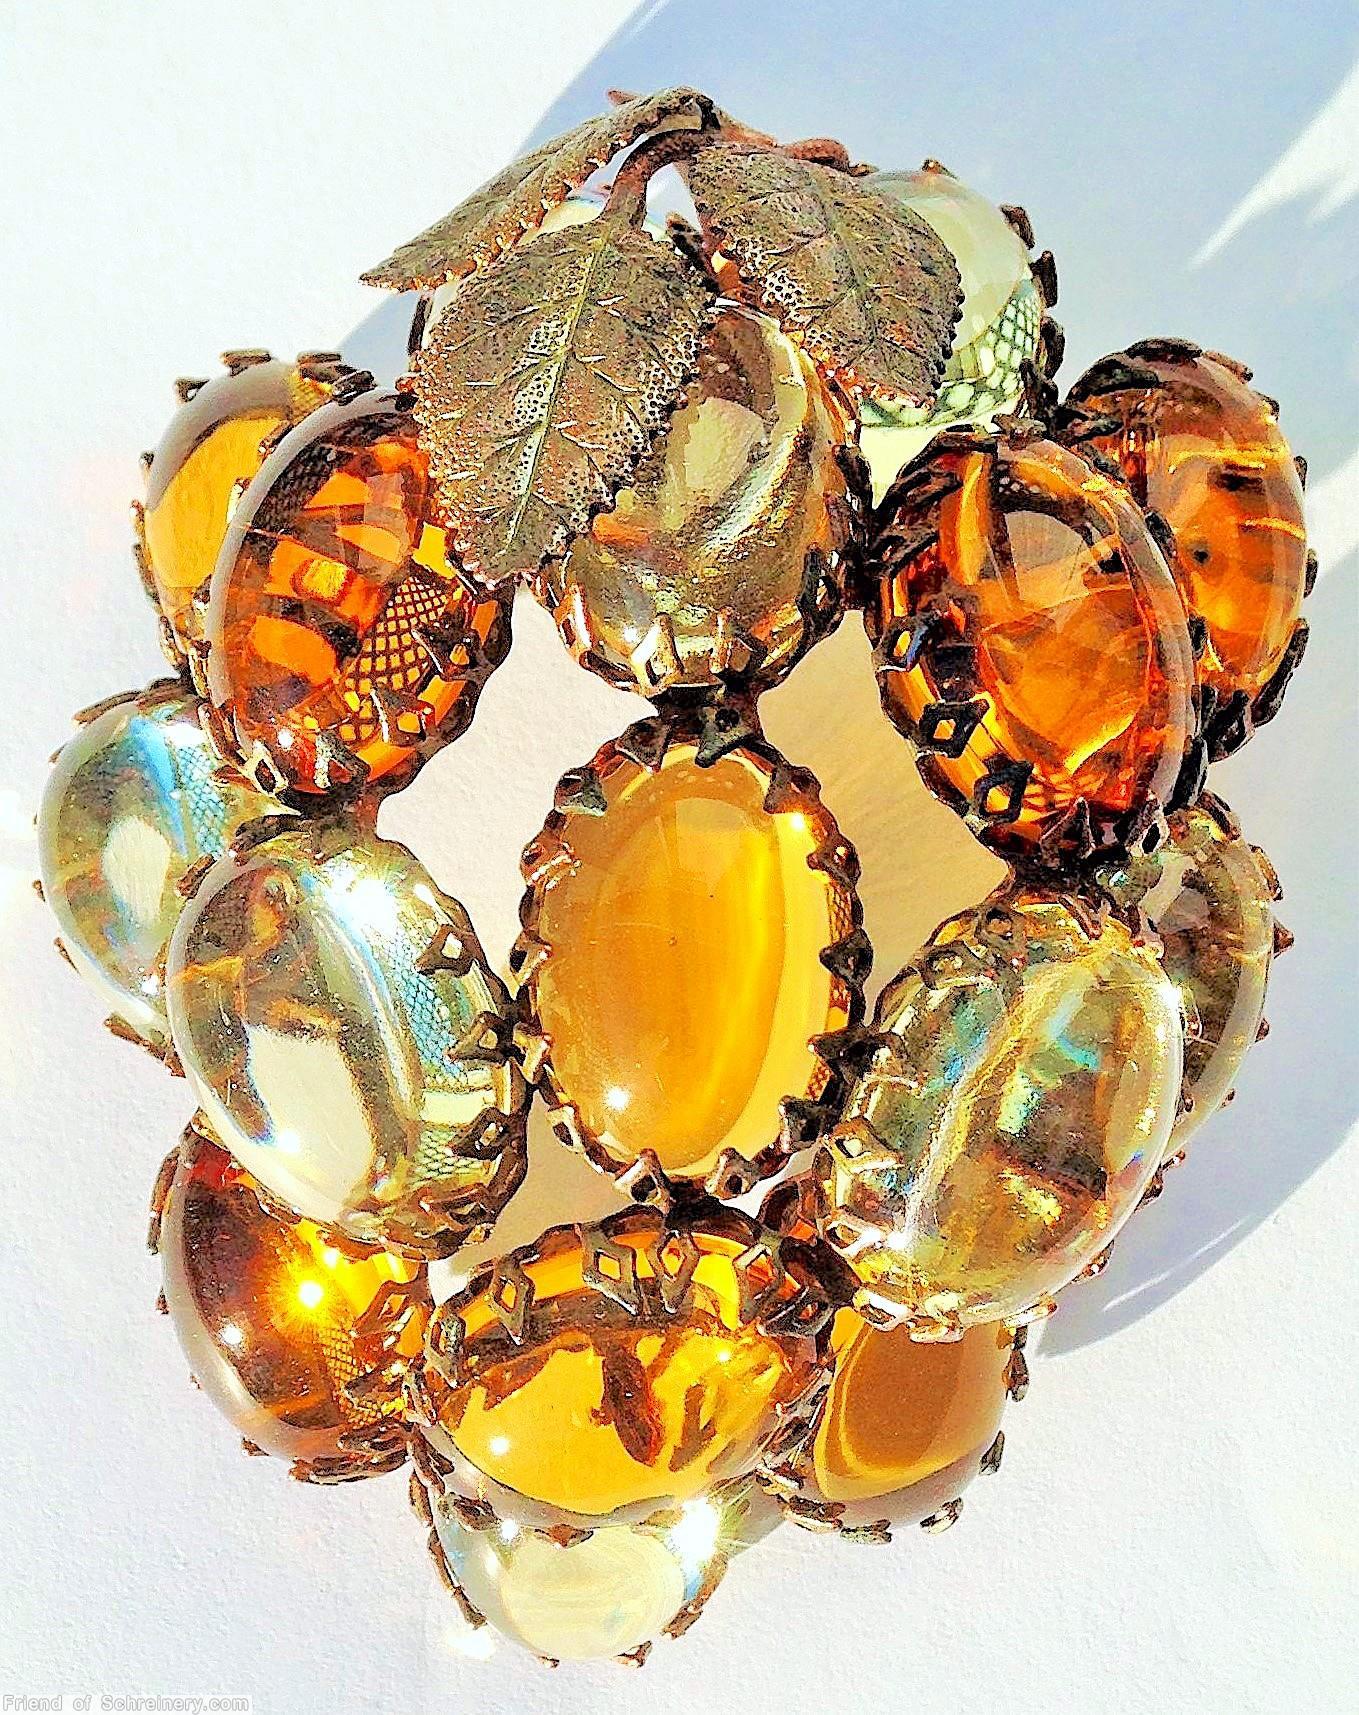 Schreiner 16 large oval cab grape pin 3 metal leaf 8 amber 8 crystal large oval cab jewelry